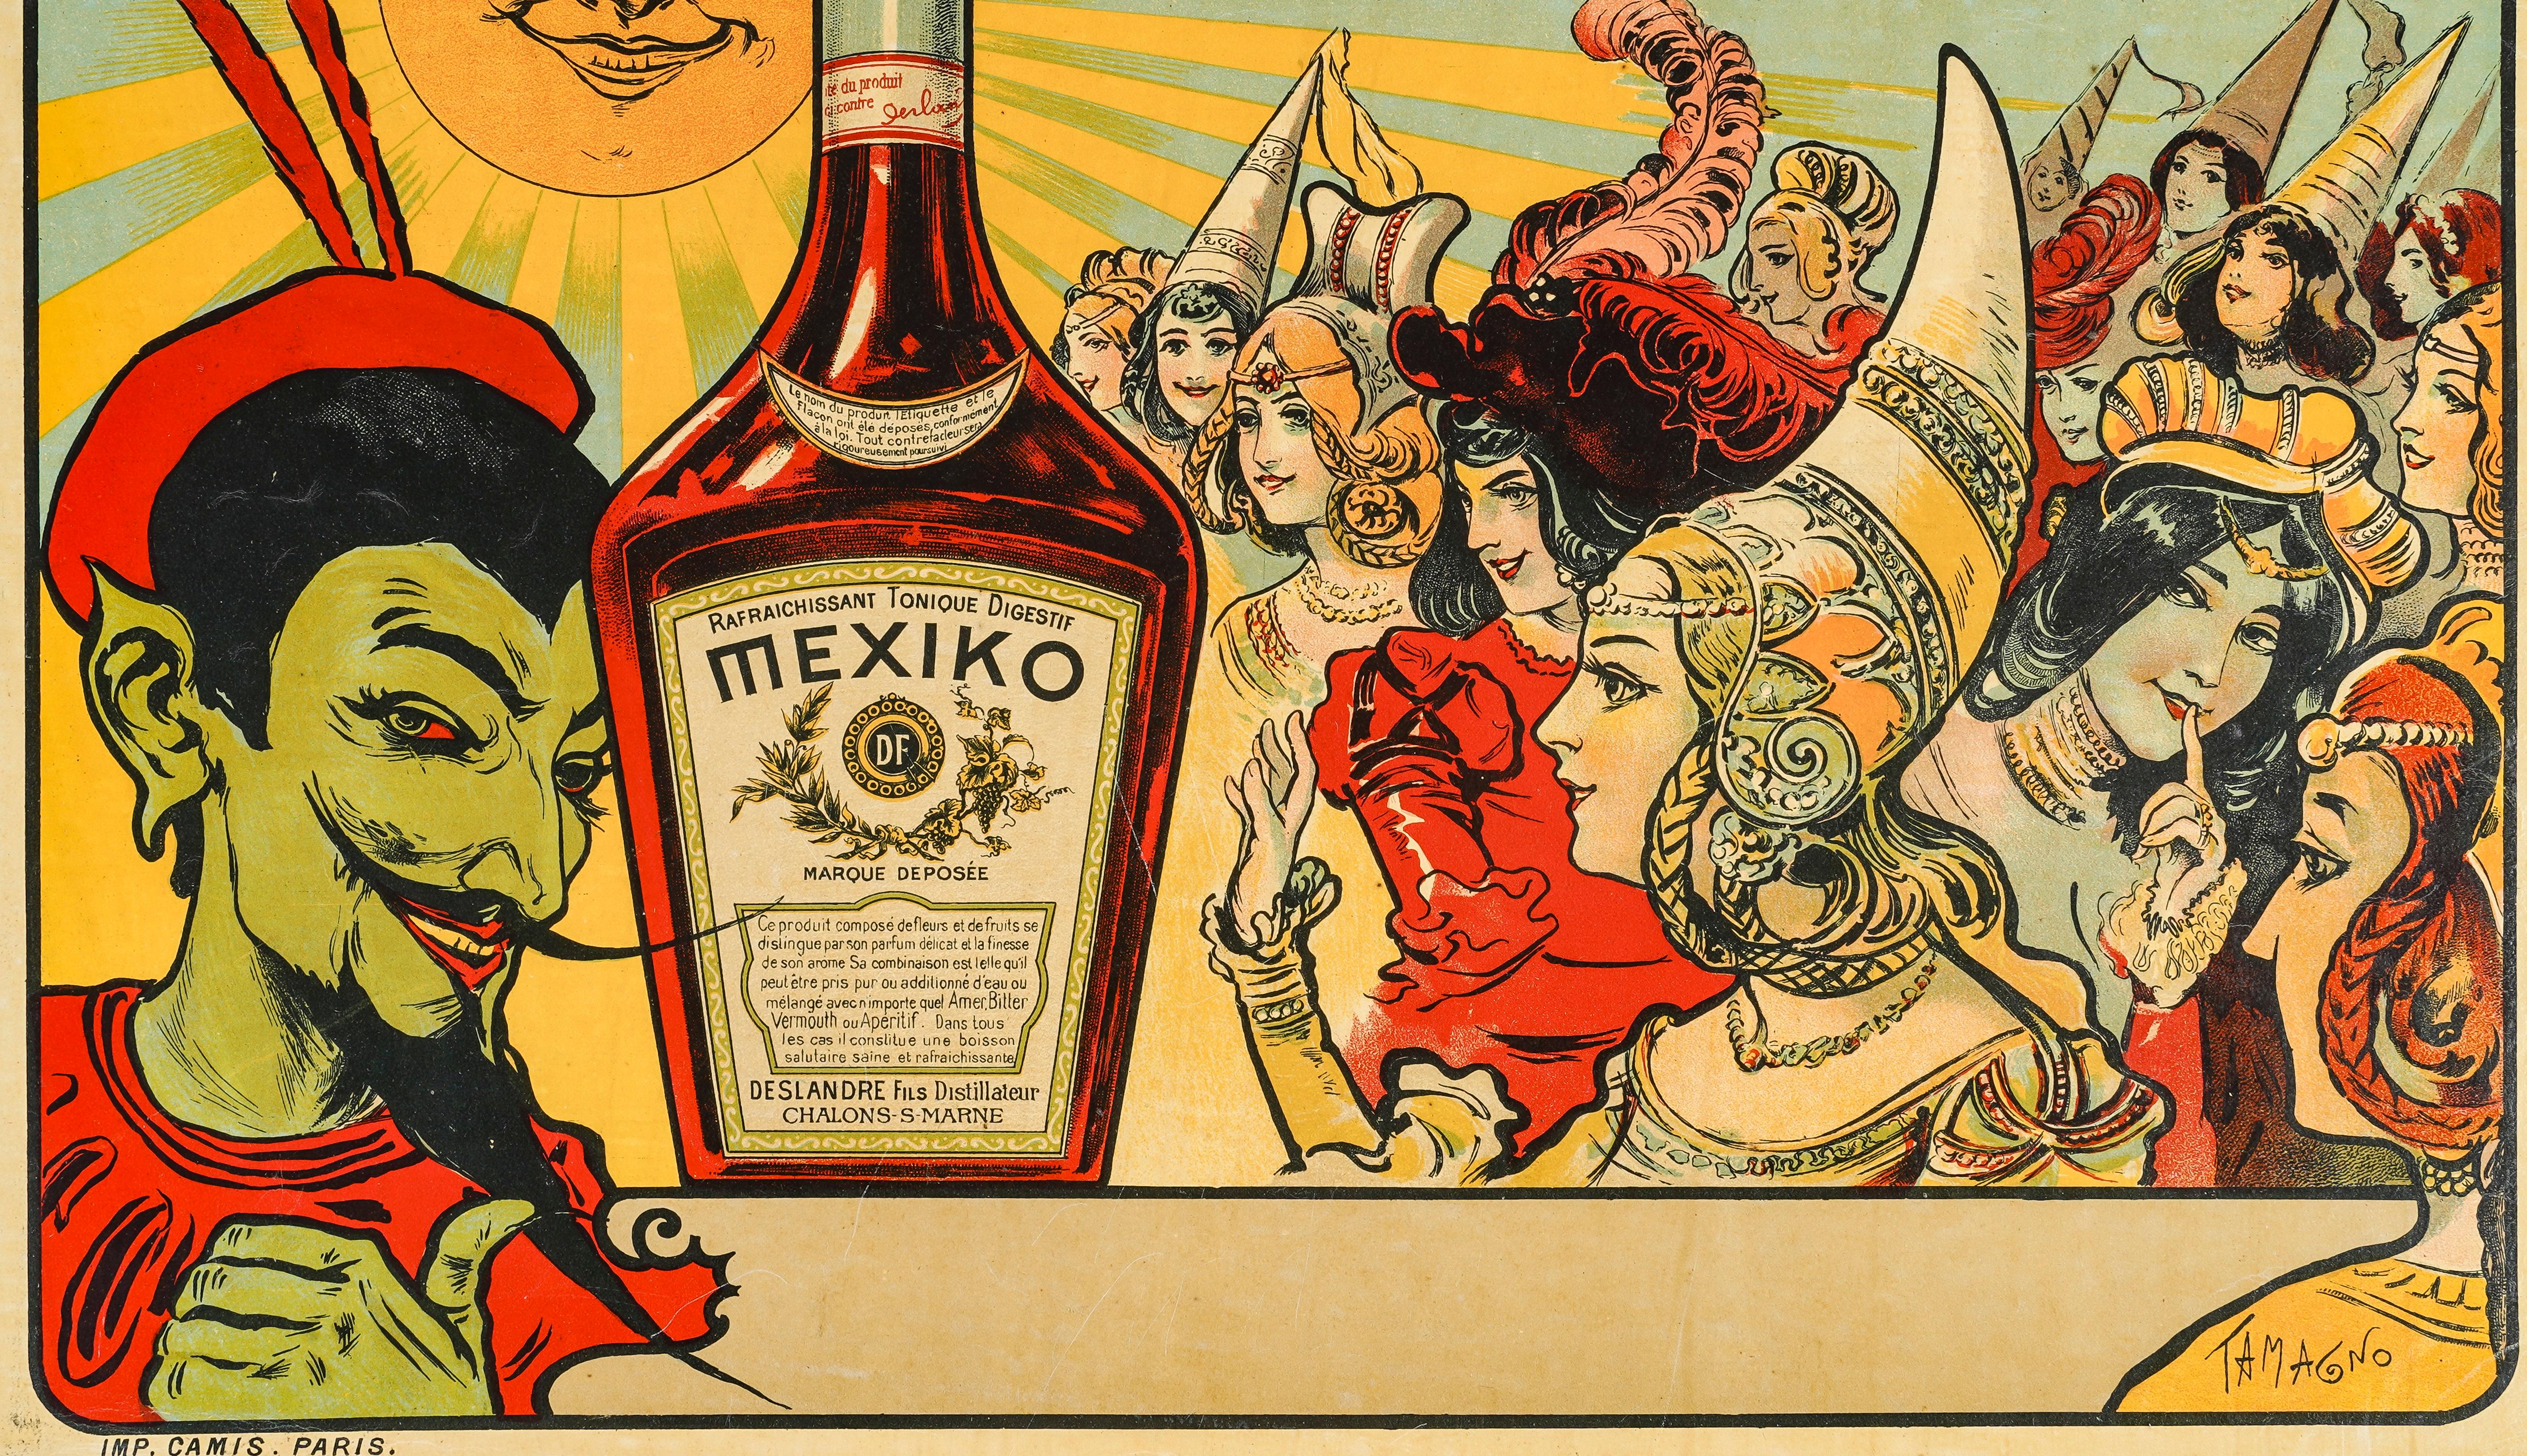 Poster by Fransisco Tamagno dating from 1900 which promotes the Mexiko digestive, distilled by Deslandres Fils in Chalons sur Marne (former name of Chalons en Champagne).

Artist: Fransisco Tamagno (1851-1933)
Title: Mexiko
Date: circa 1900
Size: 